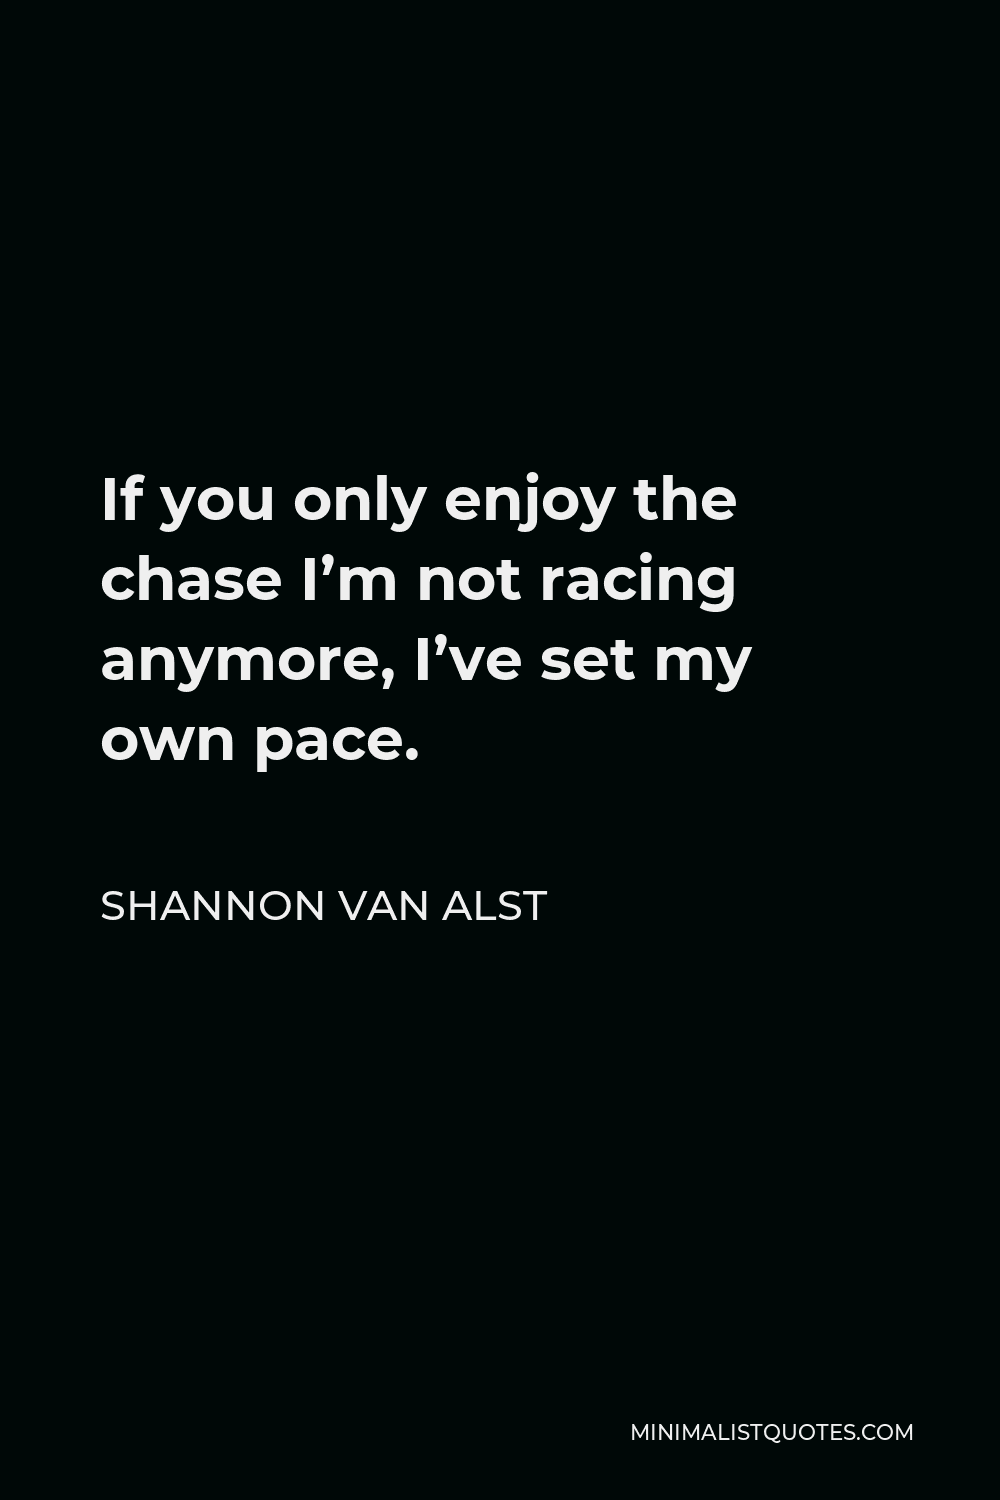 Shannon Van Alst Quote - If you only enjoy the chase I’m not racing anymore, I’ve set my own pace.